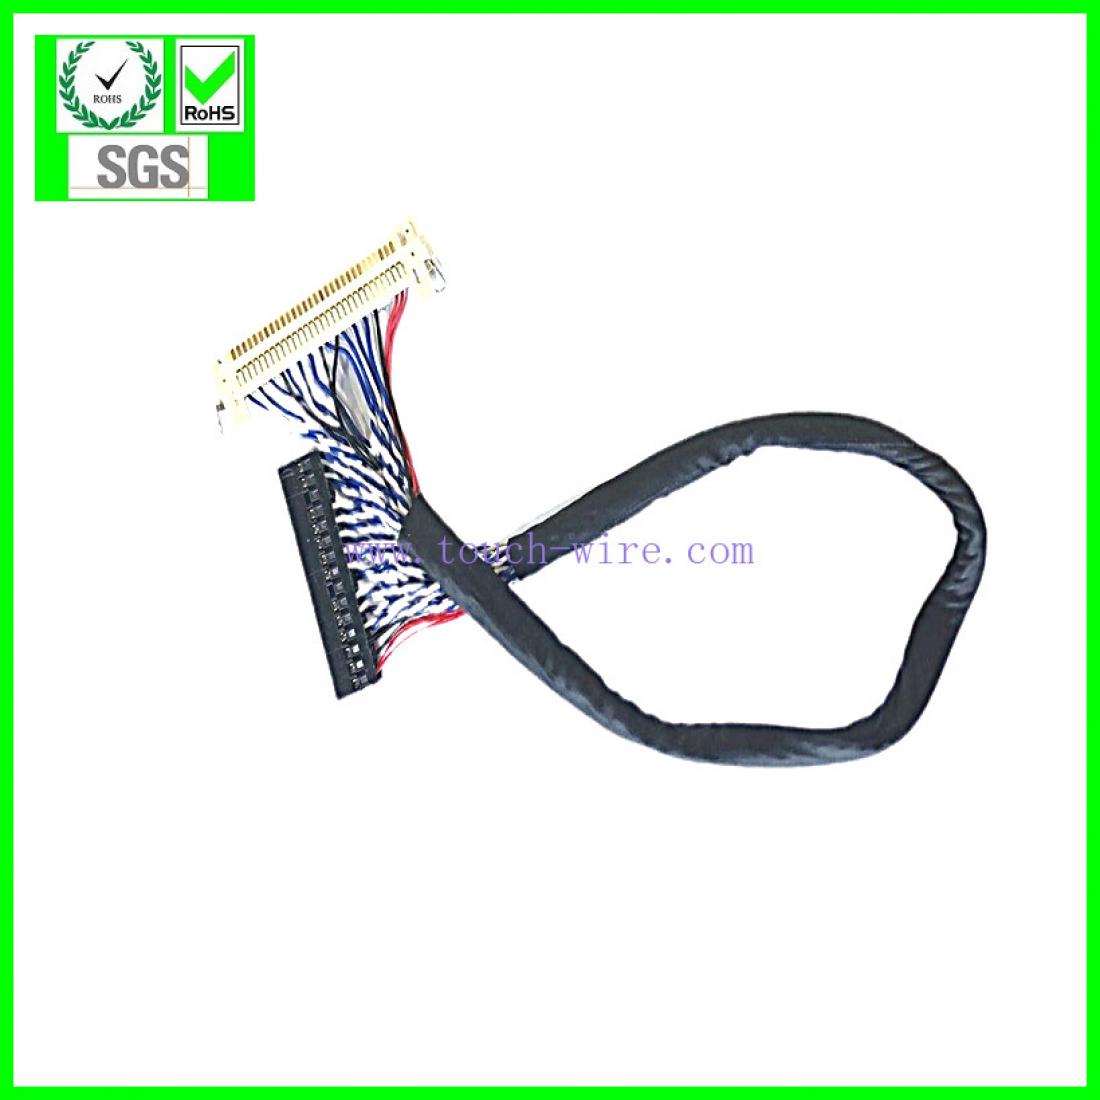 Wireharness LVDS CABLE JAE FI-X30HL to Dupon 2*15PIN